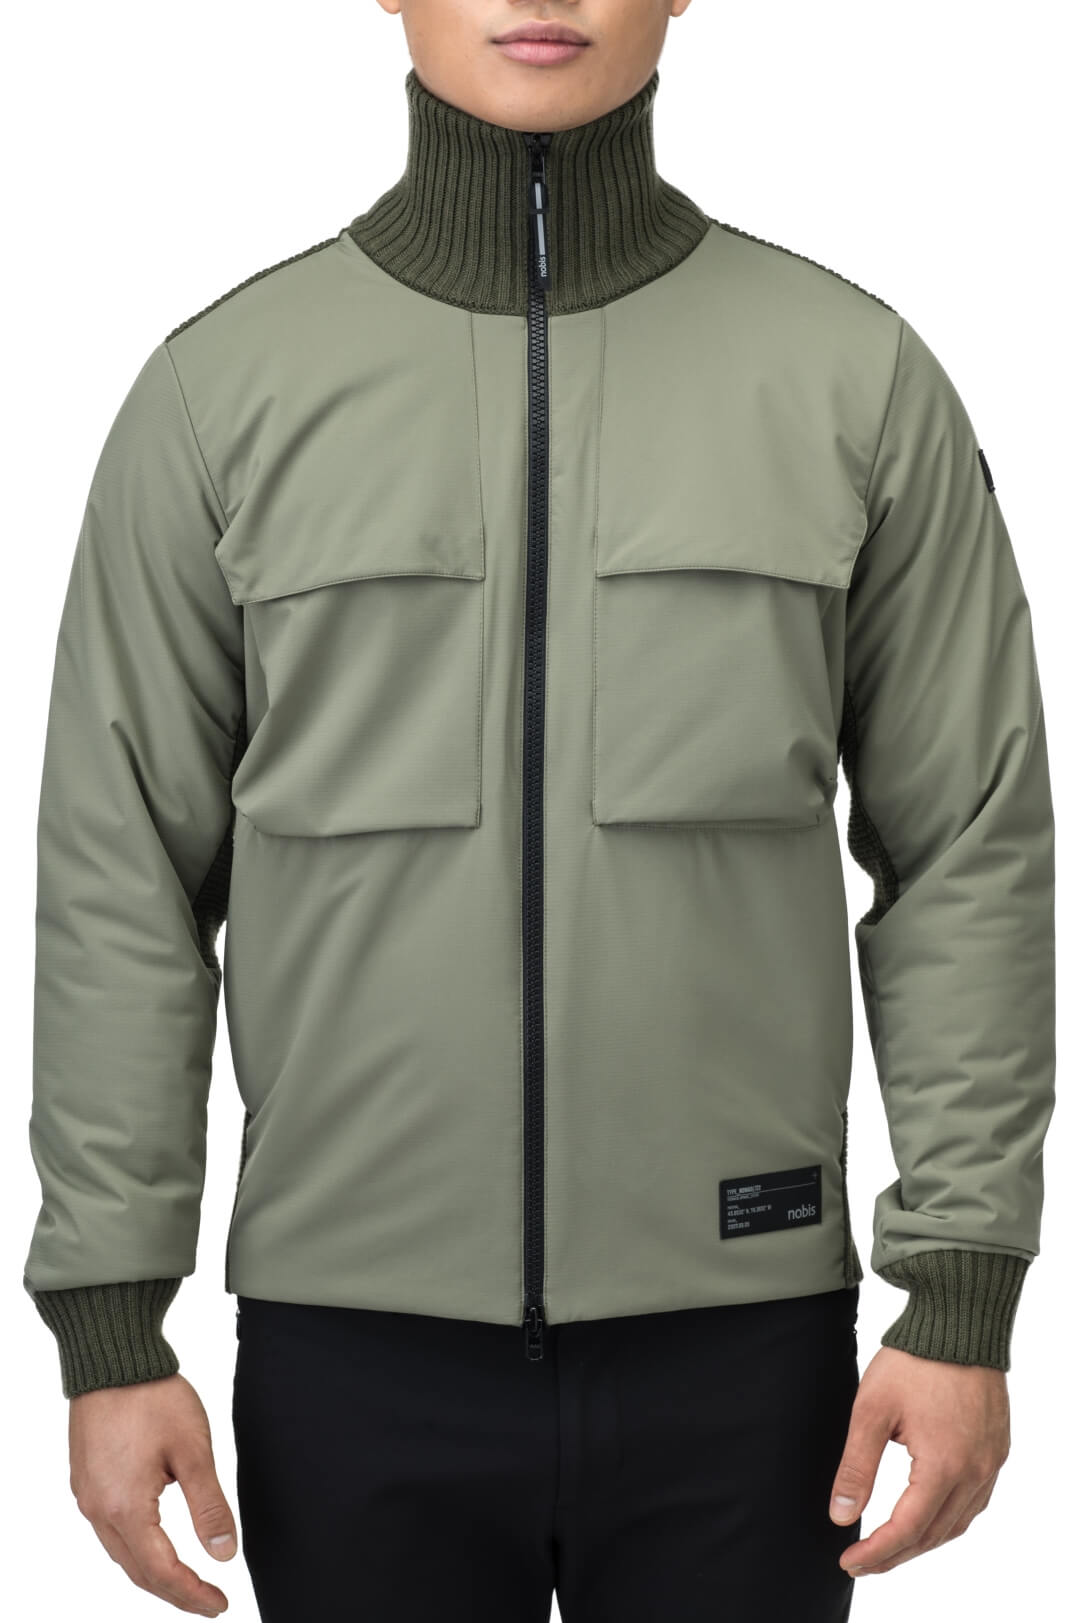 Layton Men's Tactical Hybrid Sweater in hip length, Primaloft Gold Insulation Active+, Merion wool knit collar, sleeves, back, and cuffs, two-way front zipper, and pockets at chest and waist, in Clover